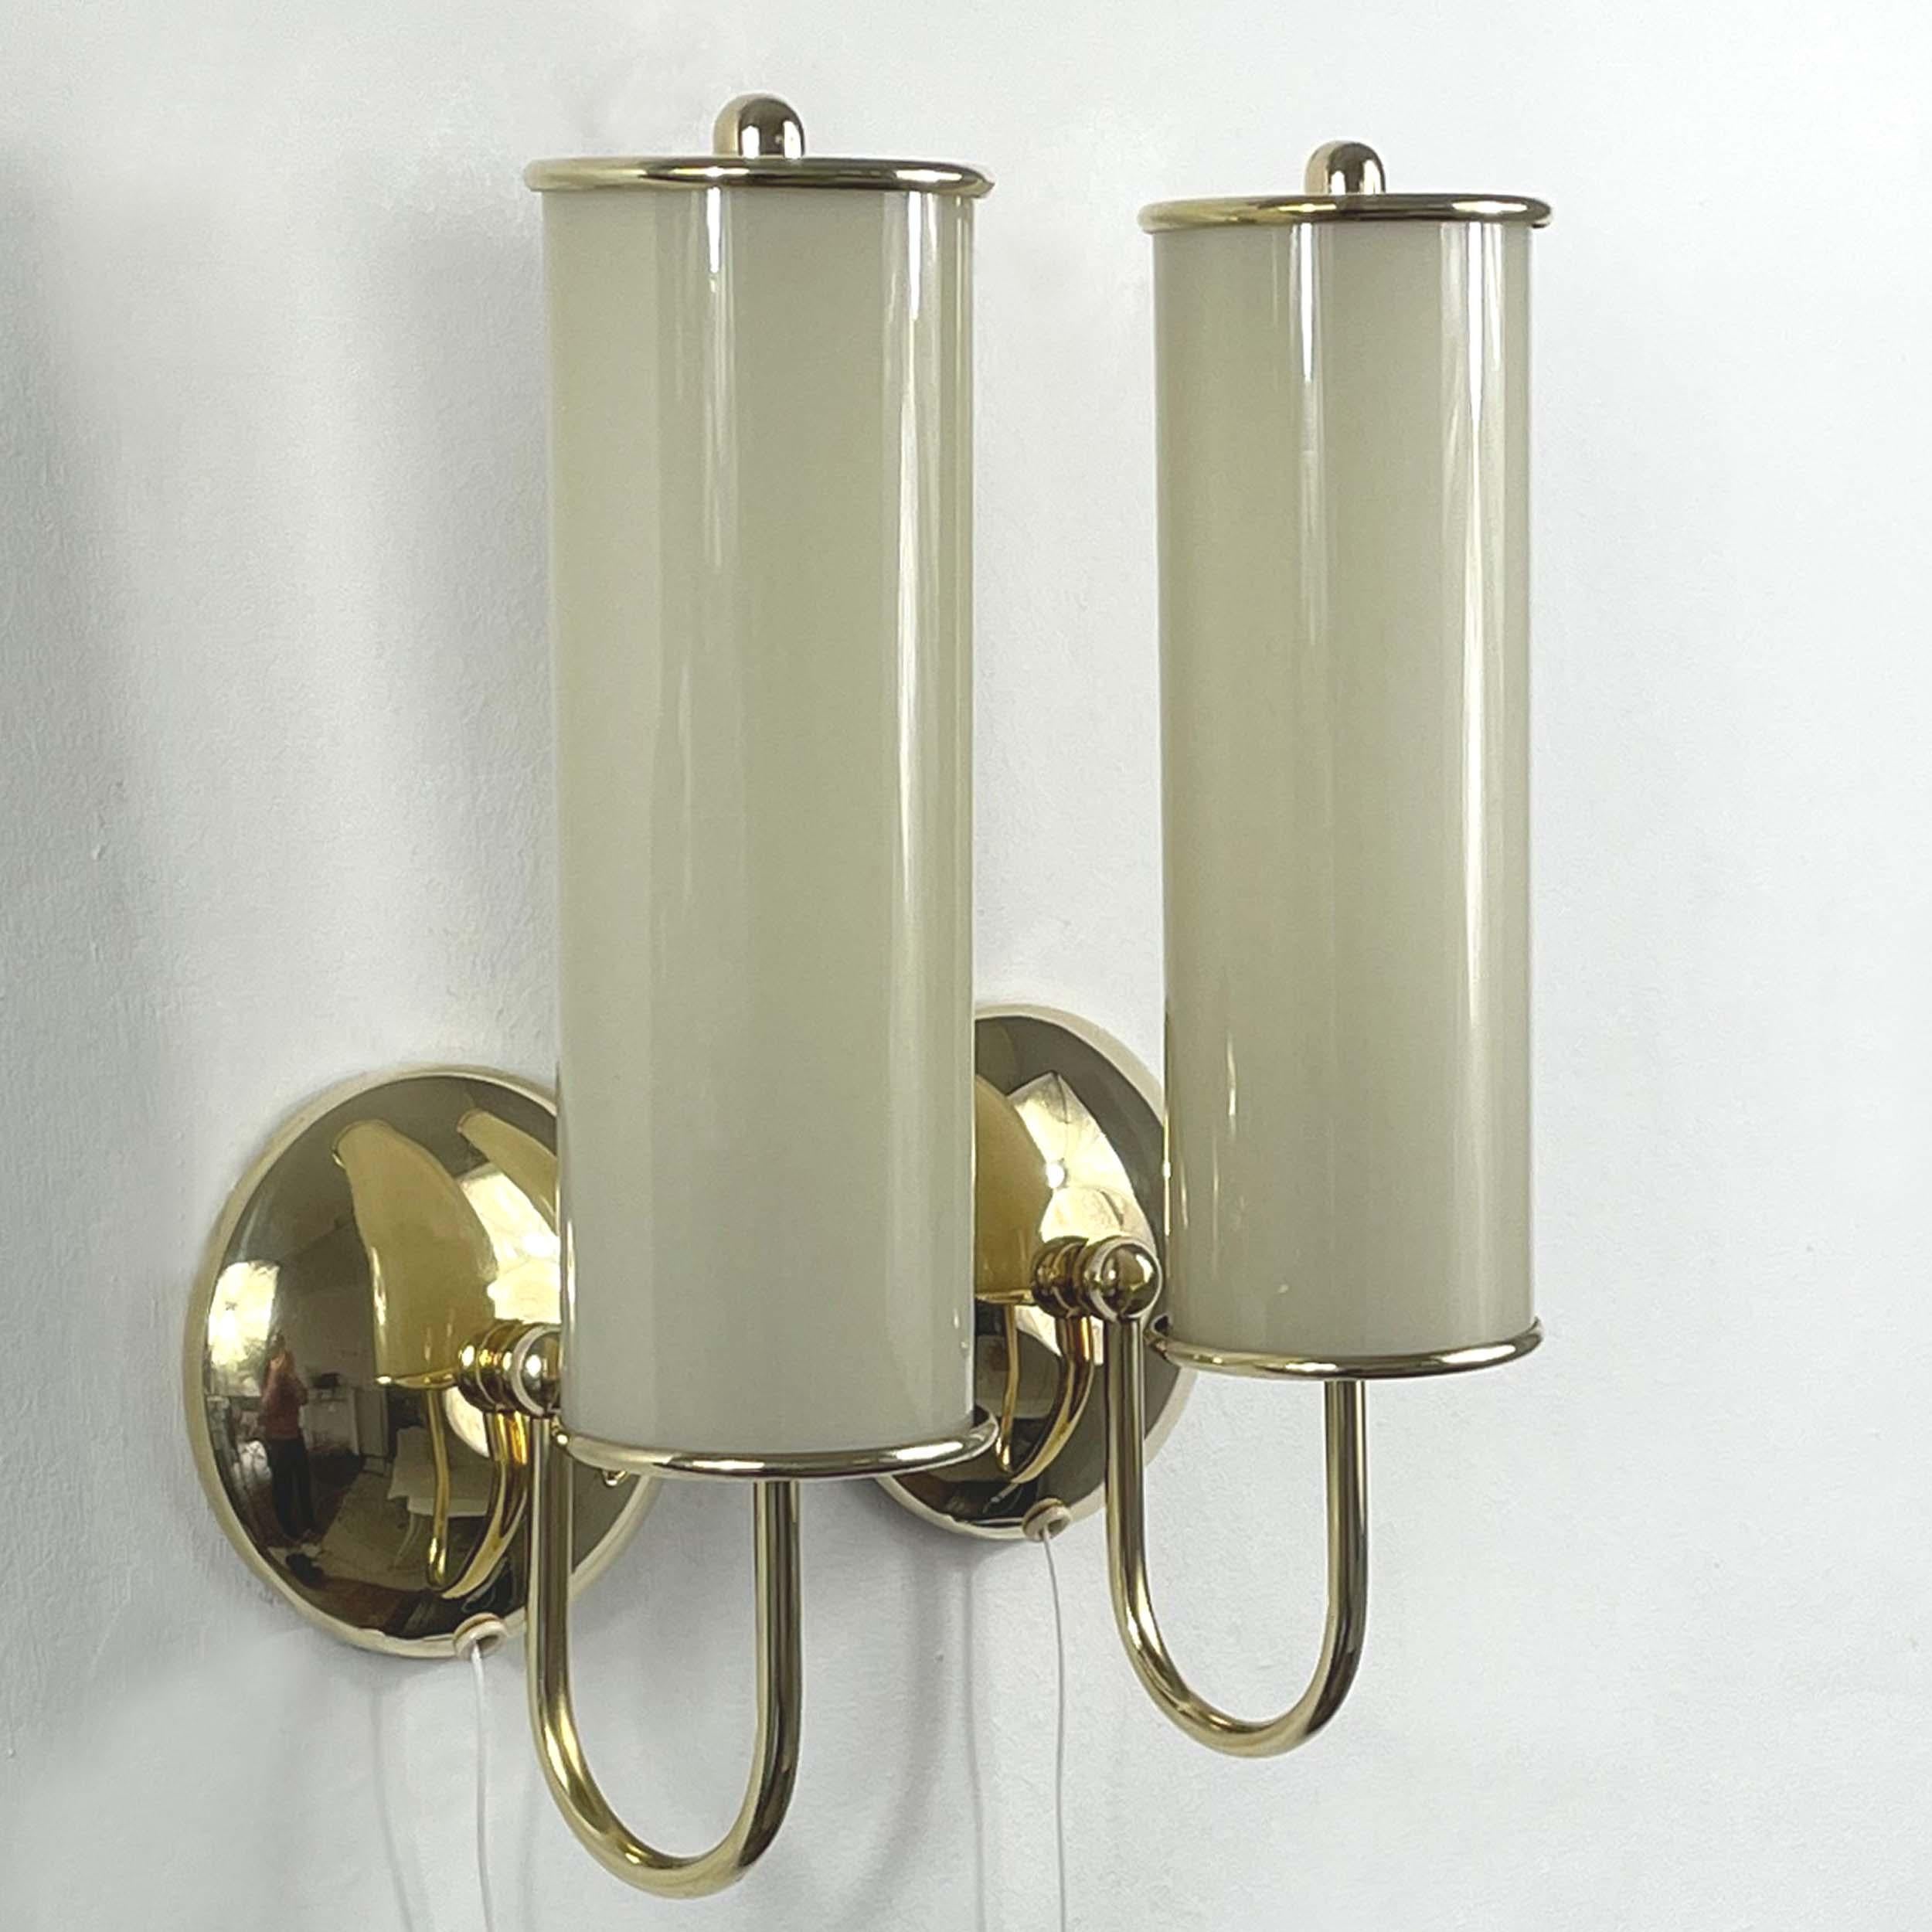 These beautiful wall lights were designed and manufactured in Germany during the Bauhaus period in the 1930s. They feature tube shaped cream colored opaline glass lampshades and brass hardware. 

The sconces have been rewired for use in US and any